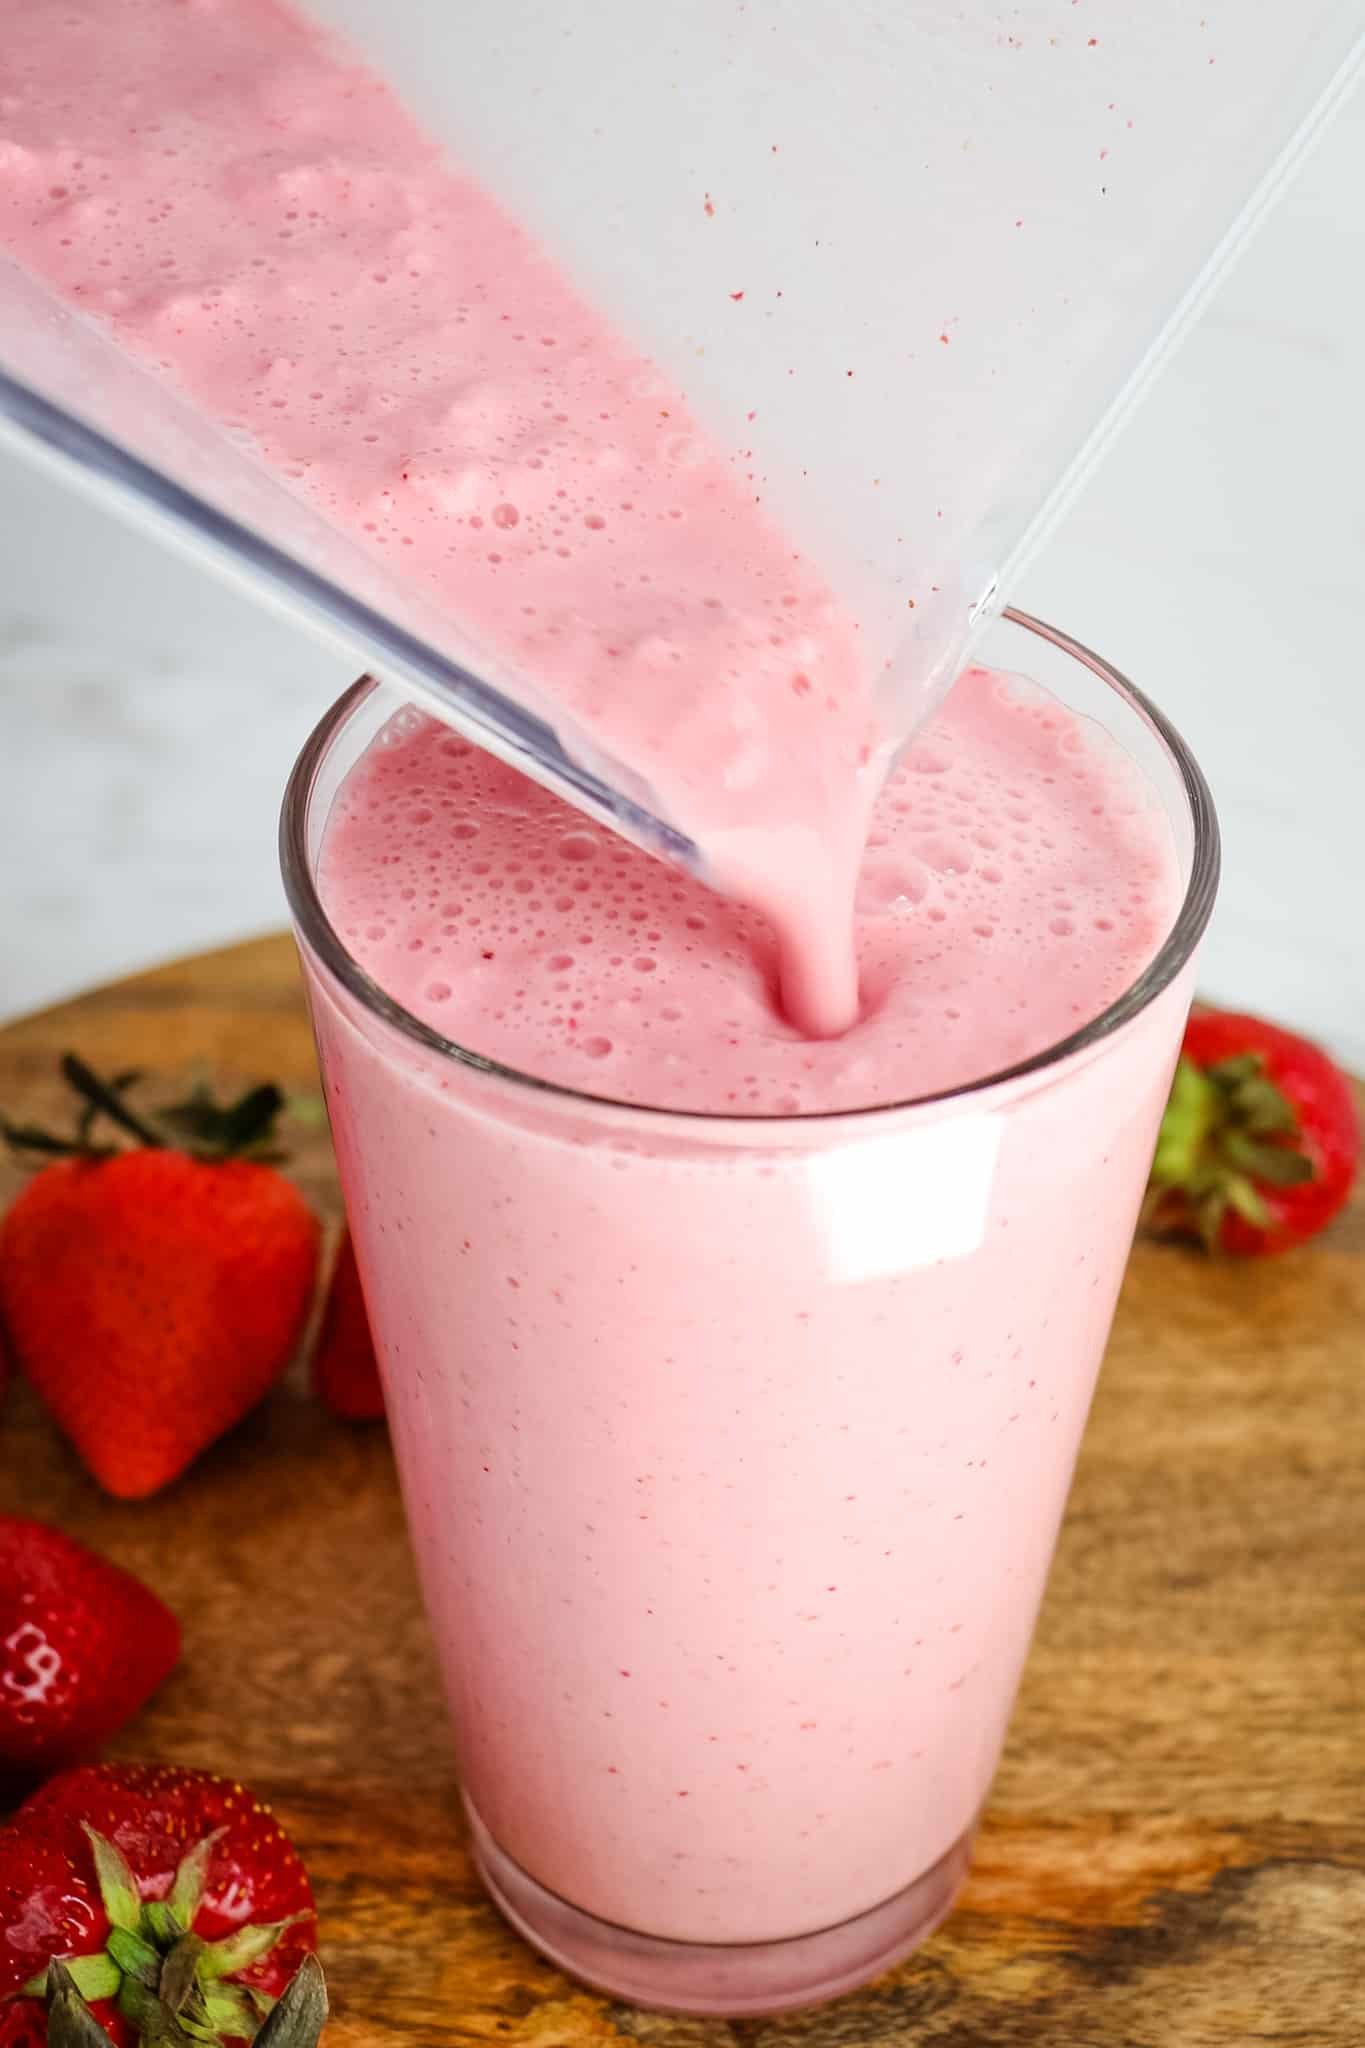 Pouring strawberry frappe into a glass from a blender pitcher.